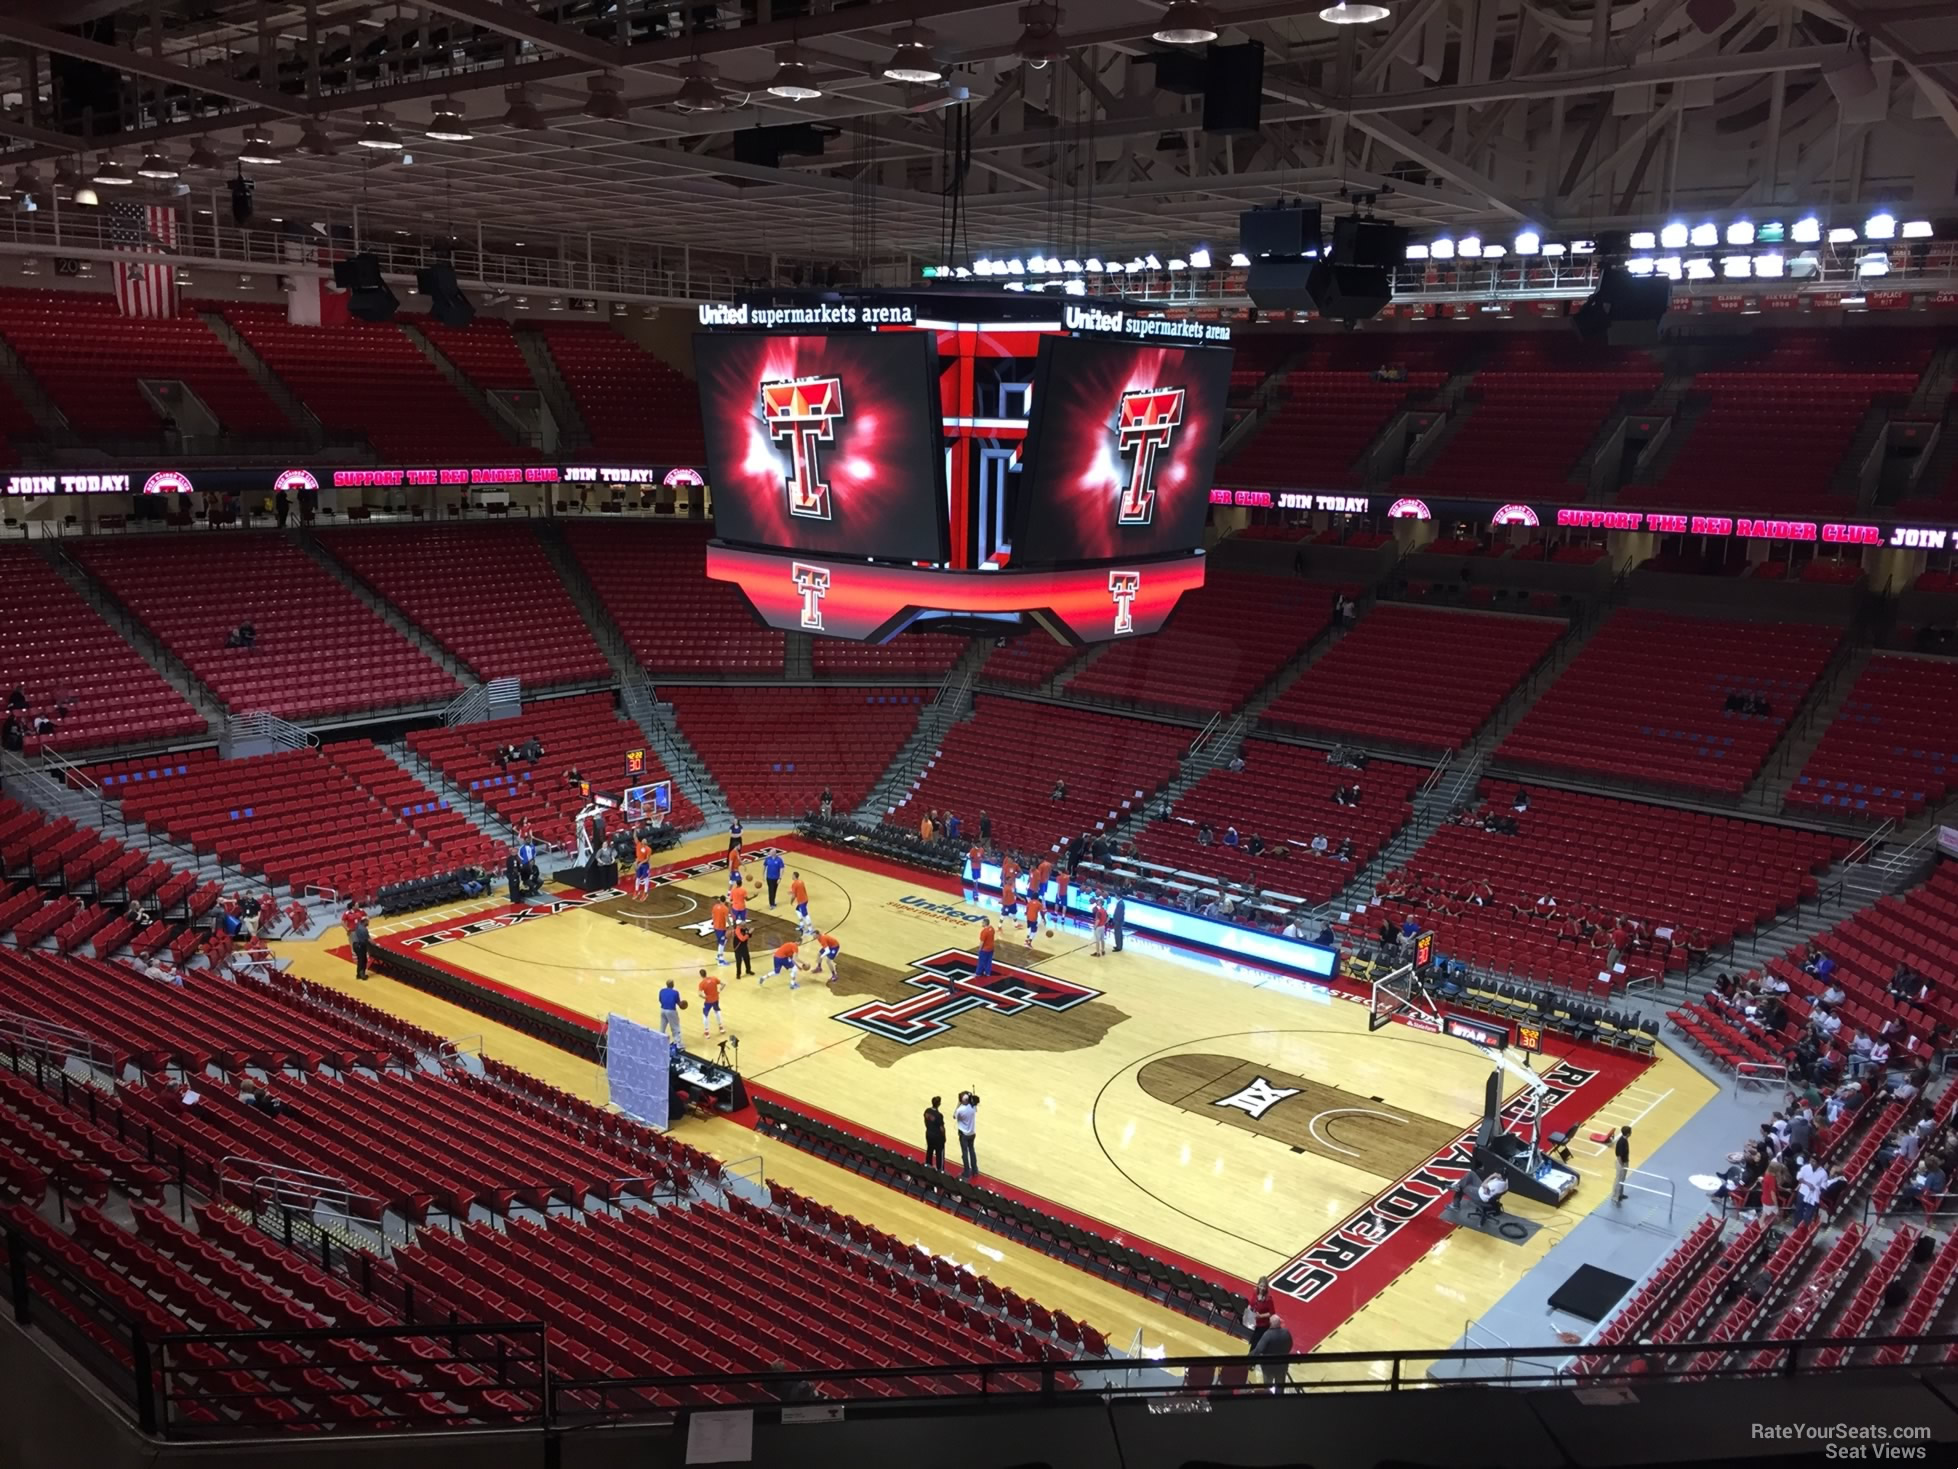 section 229, row 7 seat view  - united supermarkets arena